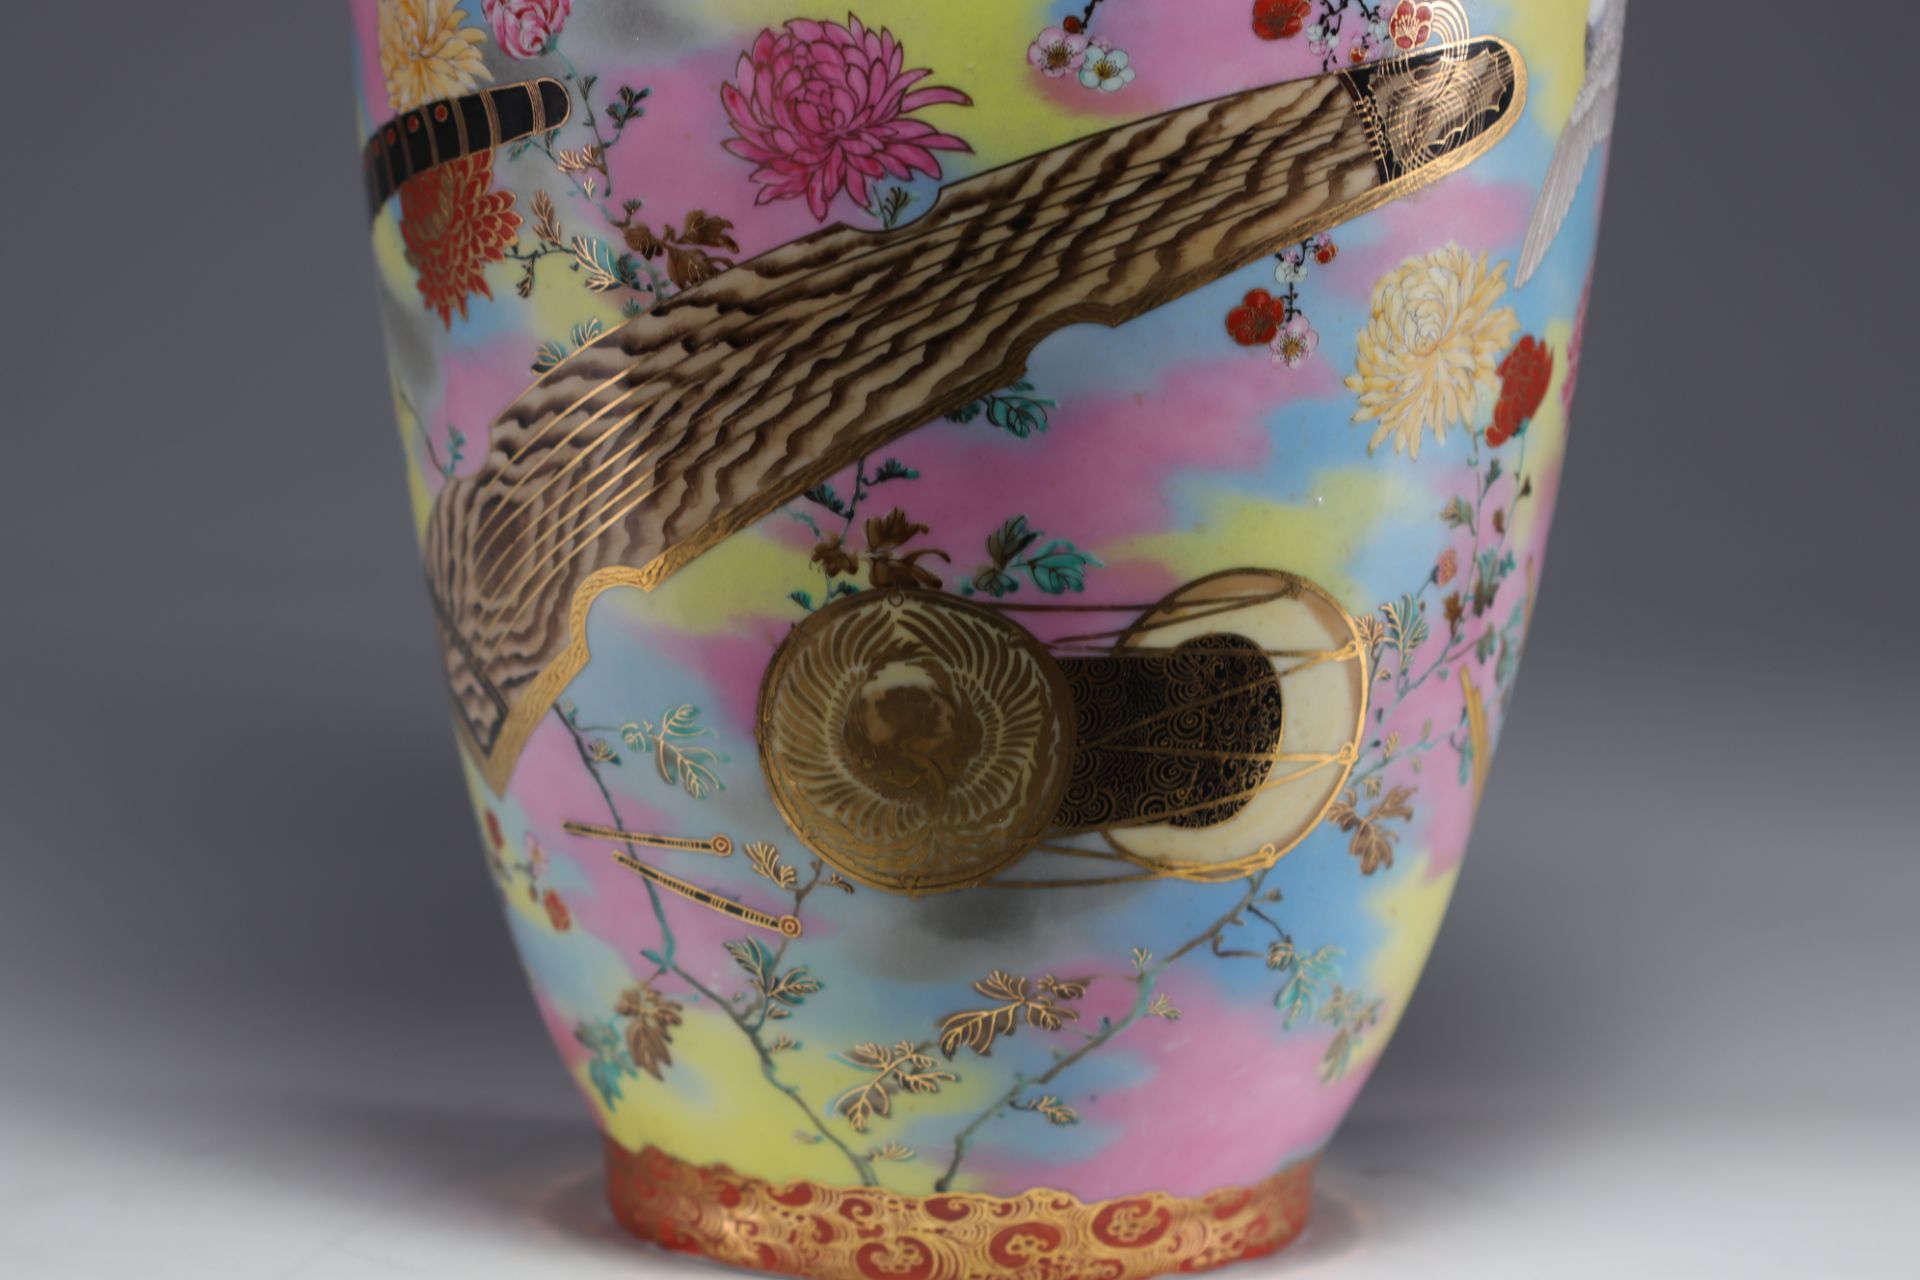 Japan - A pair of Satsuma vases with radiant doves, pigeons and flowers, Meiji period.Â - Image 5 of 8